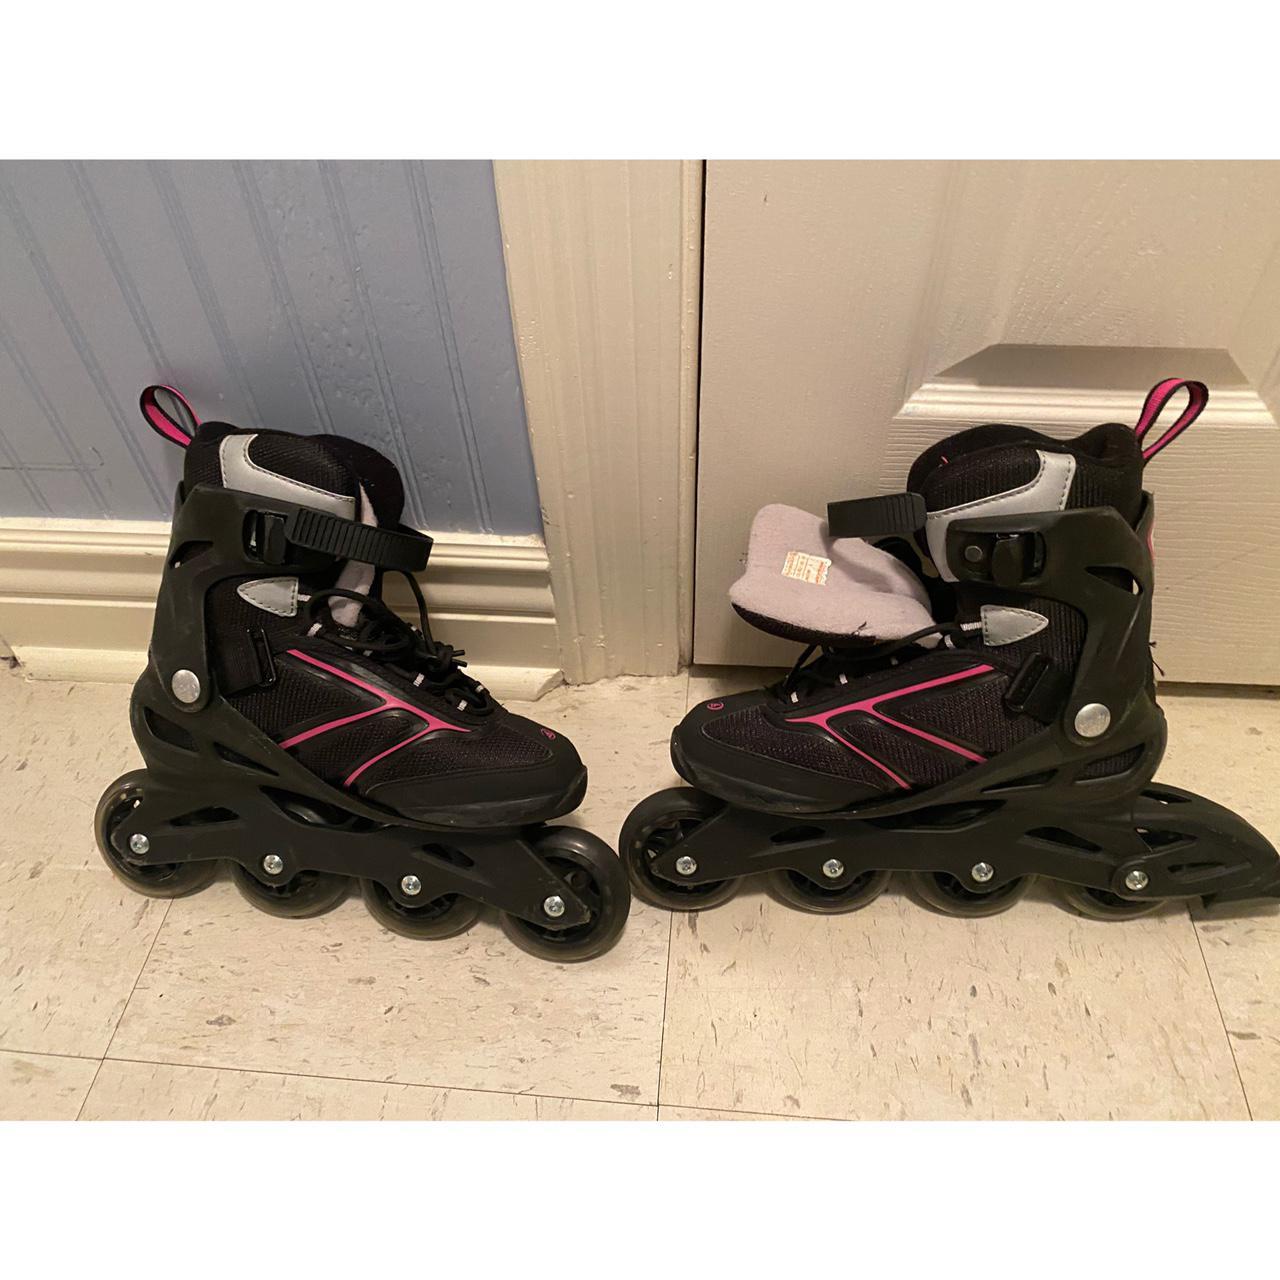 Product Image 2 - Women’s Rollerblades Pink/Black 

- LIGHTLY